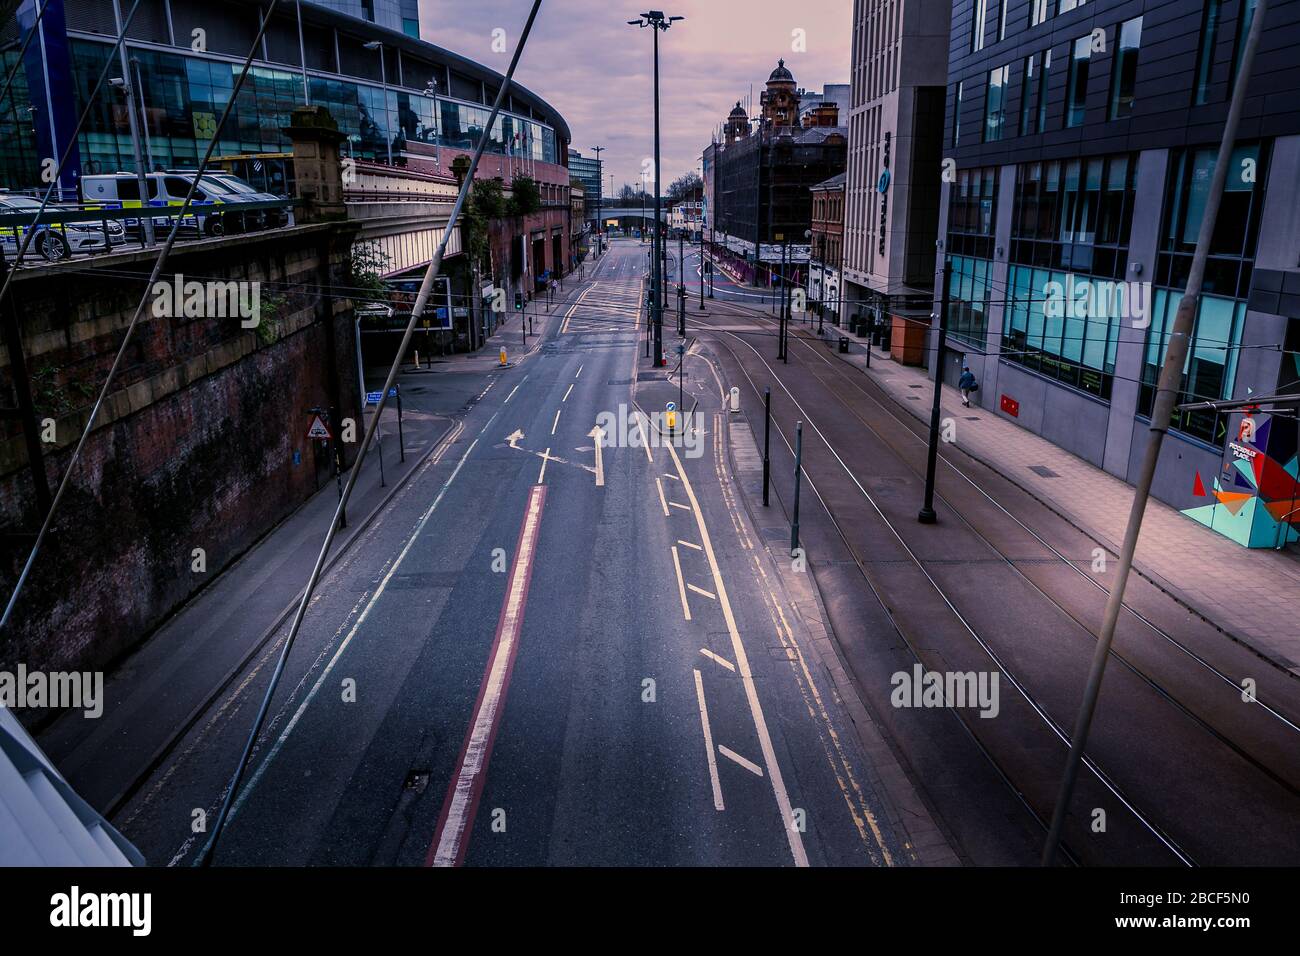 Piccadilly, Manchester, United Kingdom. Empty streets, closed business's during the coronavirus outbreak, April 2020. Stock Photo